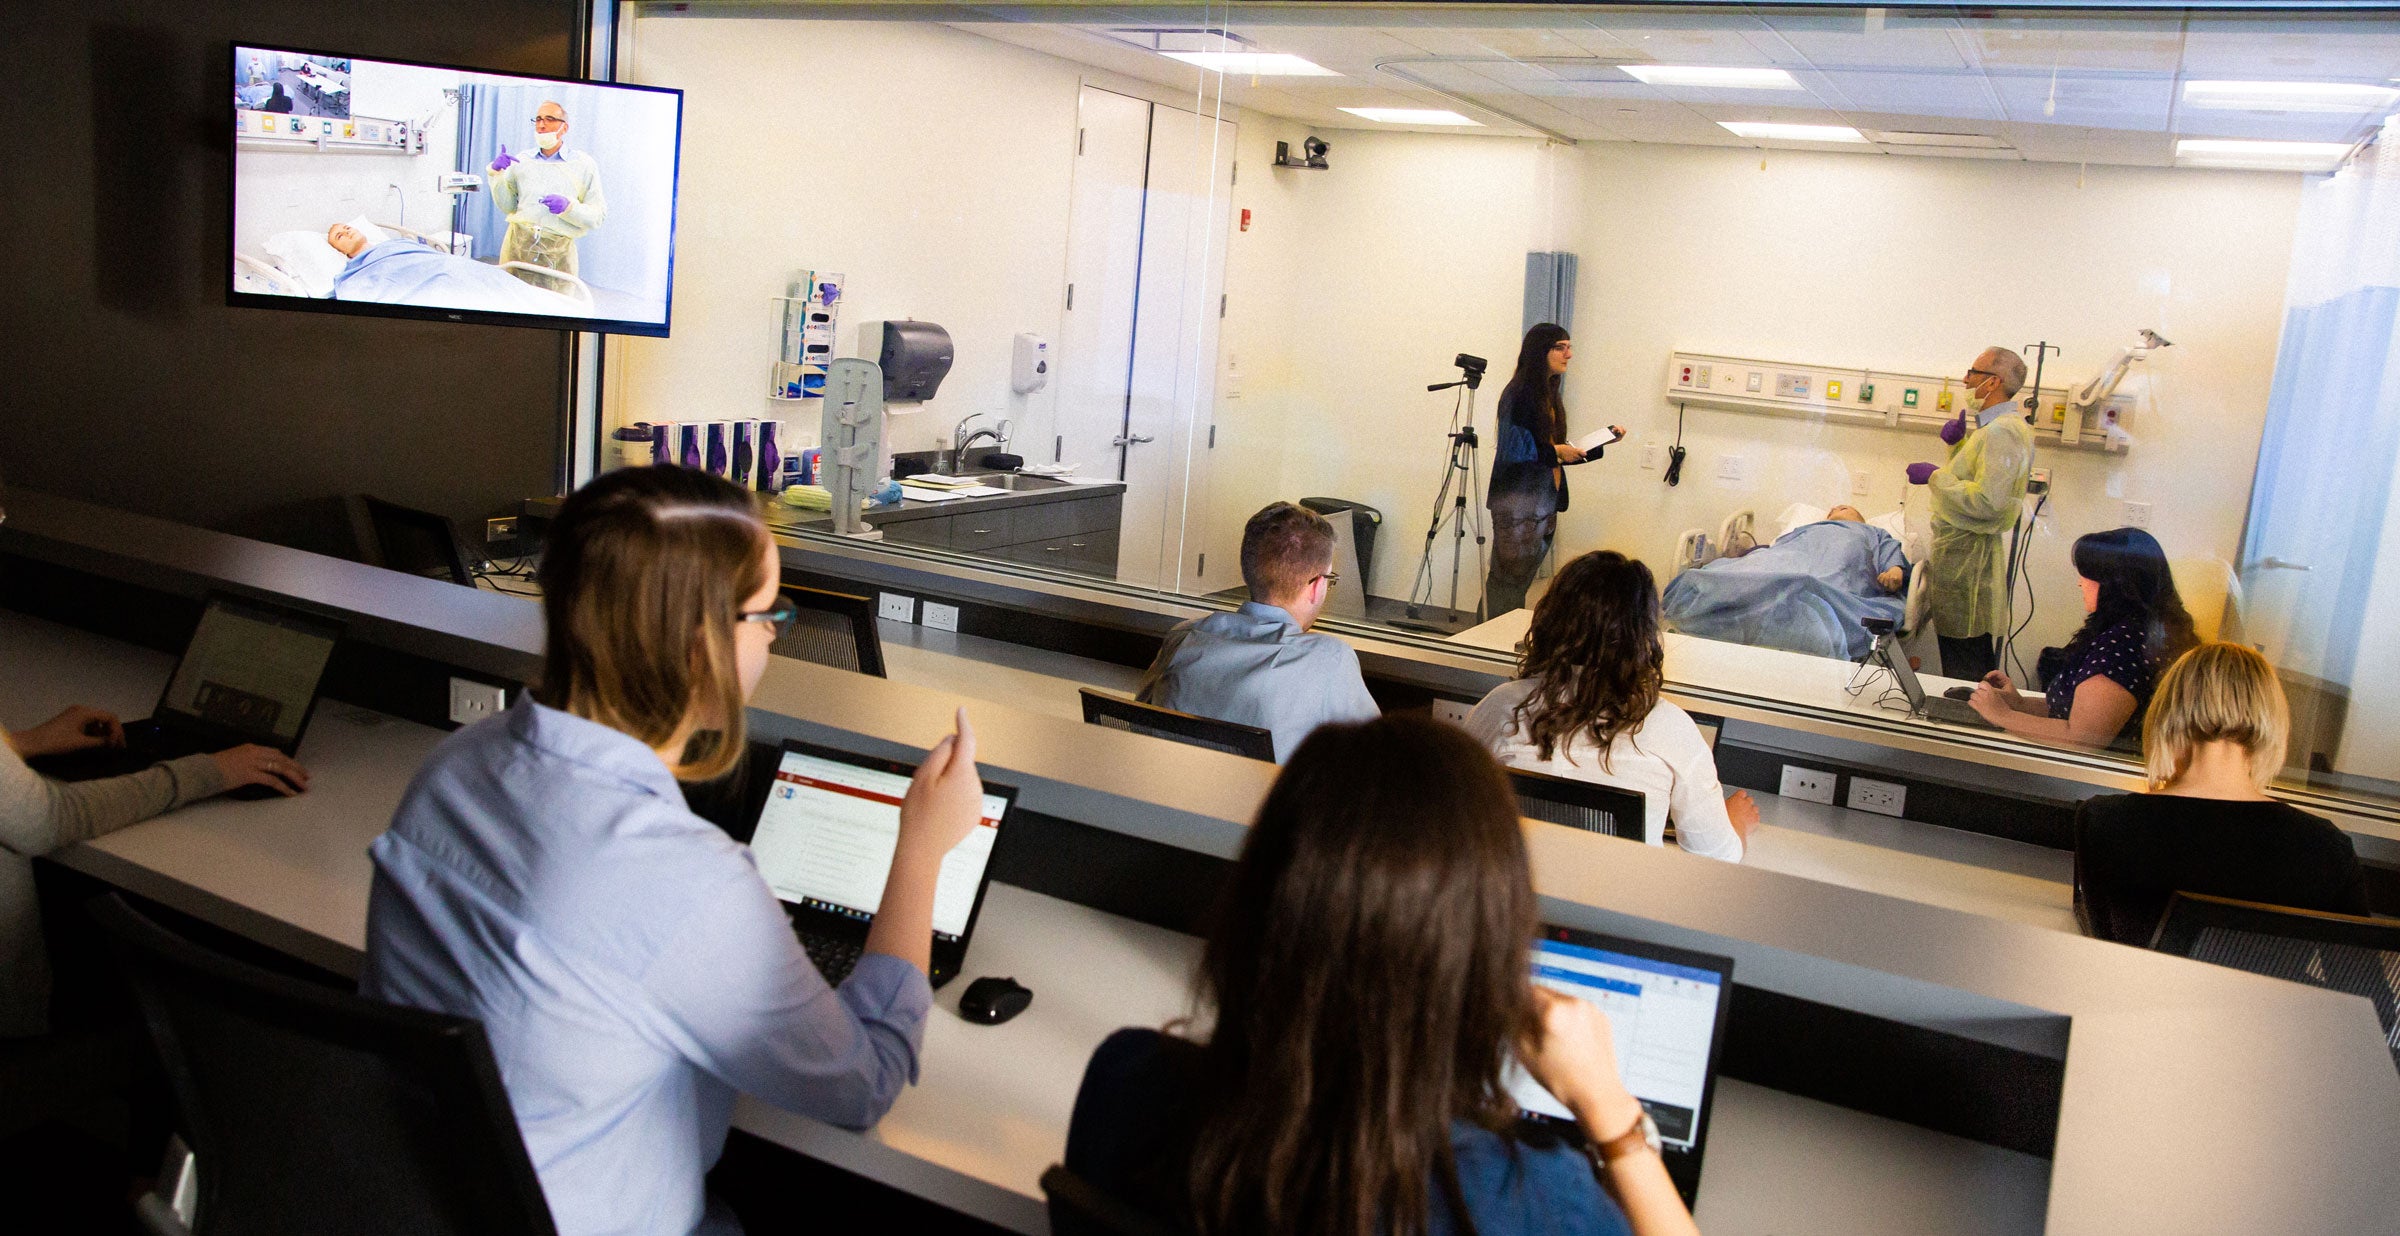 Concord Usability Lab's clinical product observation room